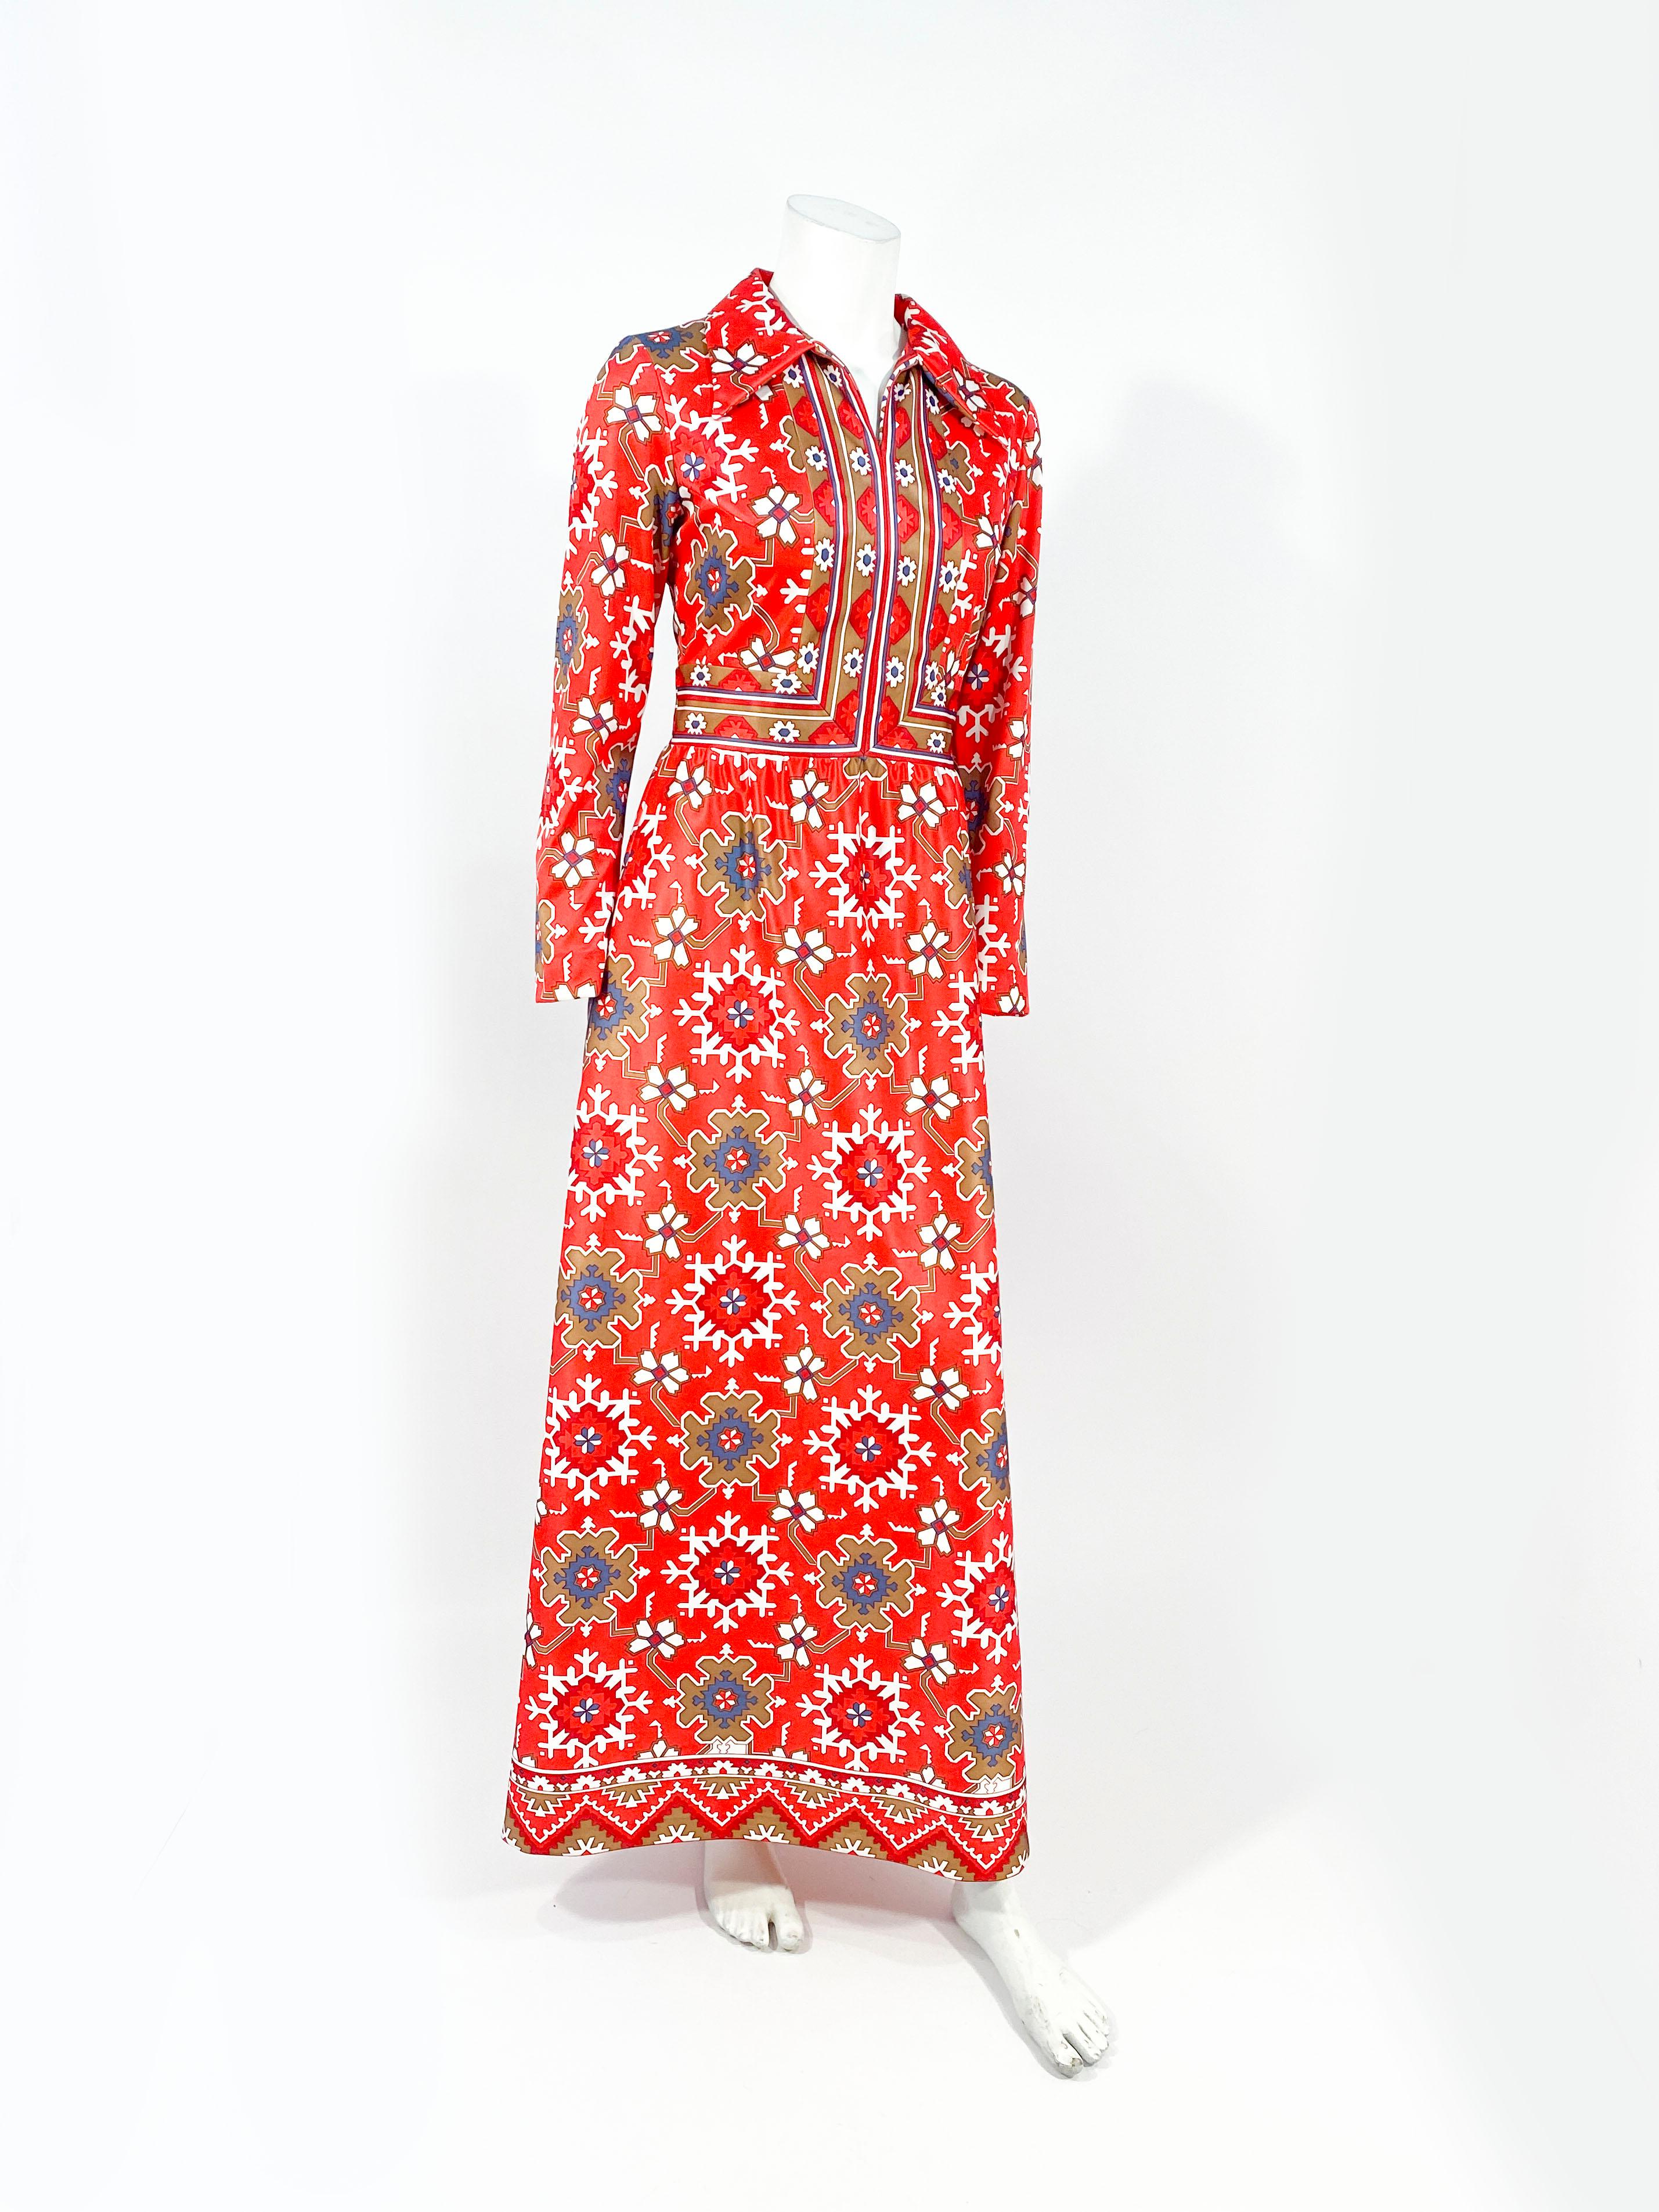 Women's 1970s Coral and Red Printed Dress with Boarder Accents